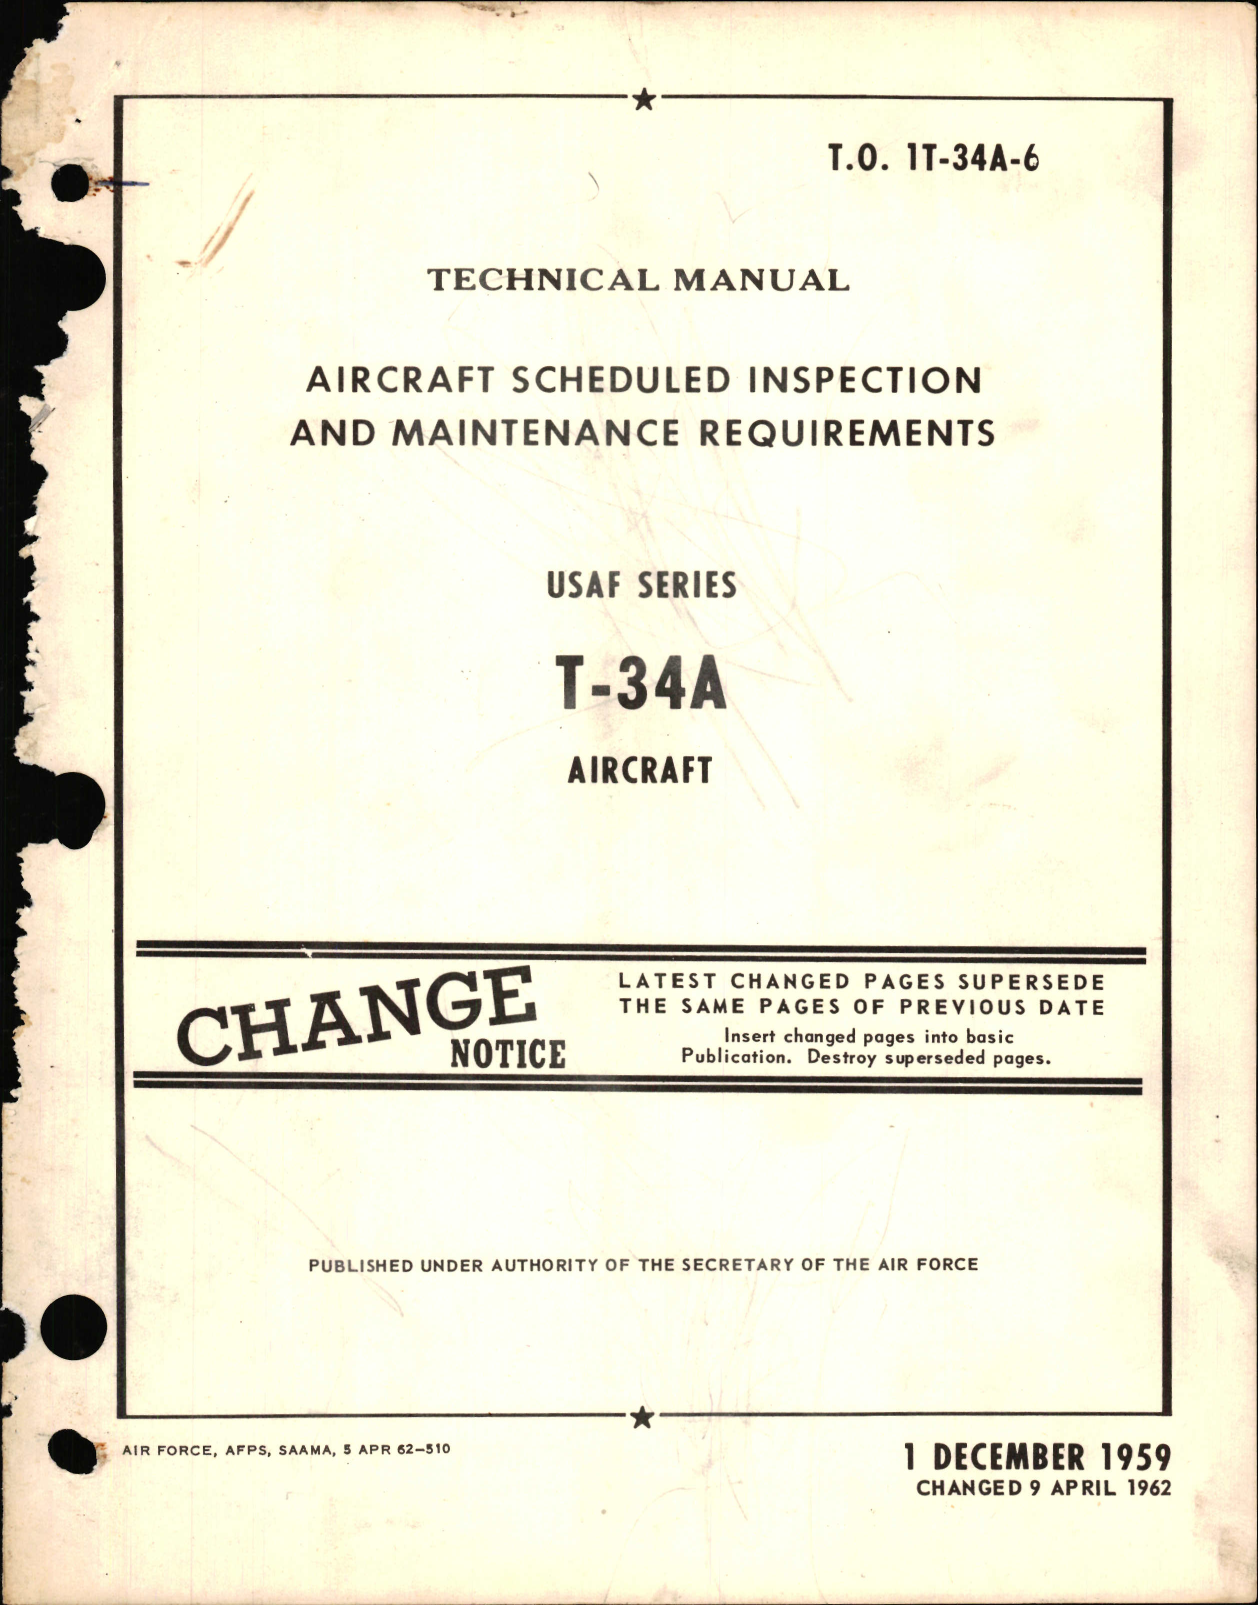 Sample page 1 from AirCorps Library document: Aircraft Scheduled Inspection and Maintenance Requirements for T-34A